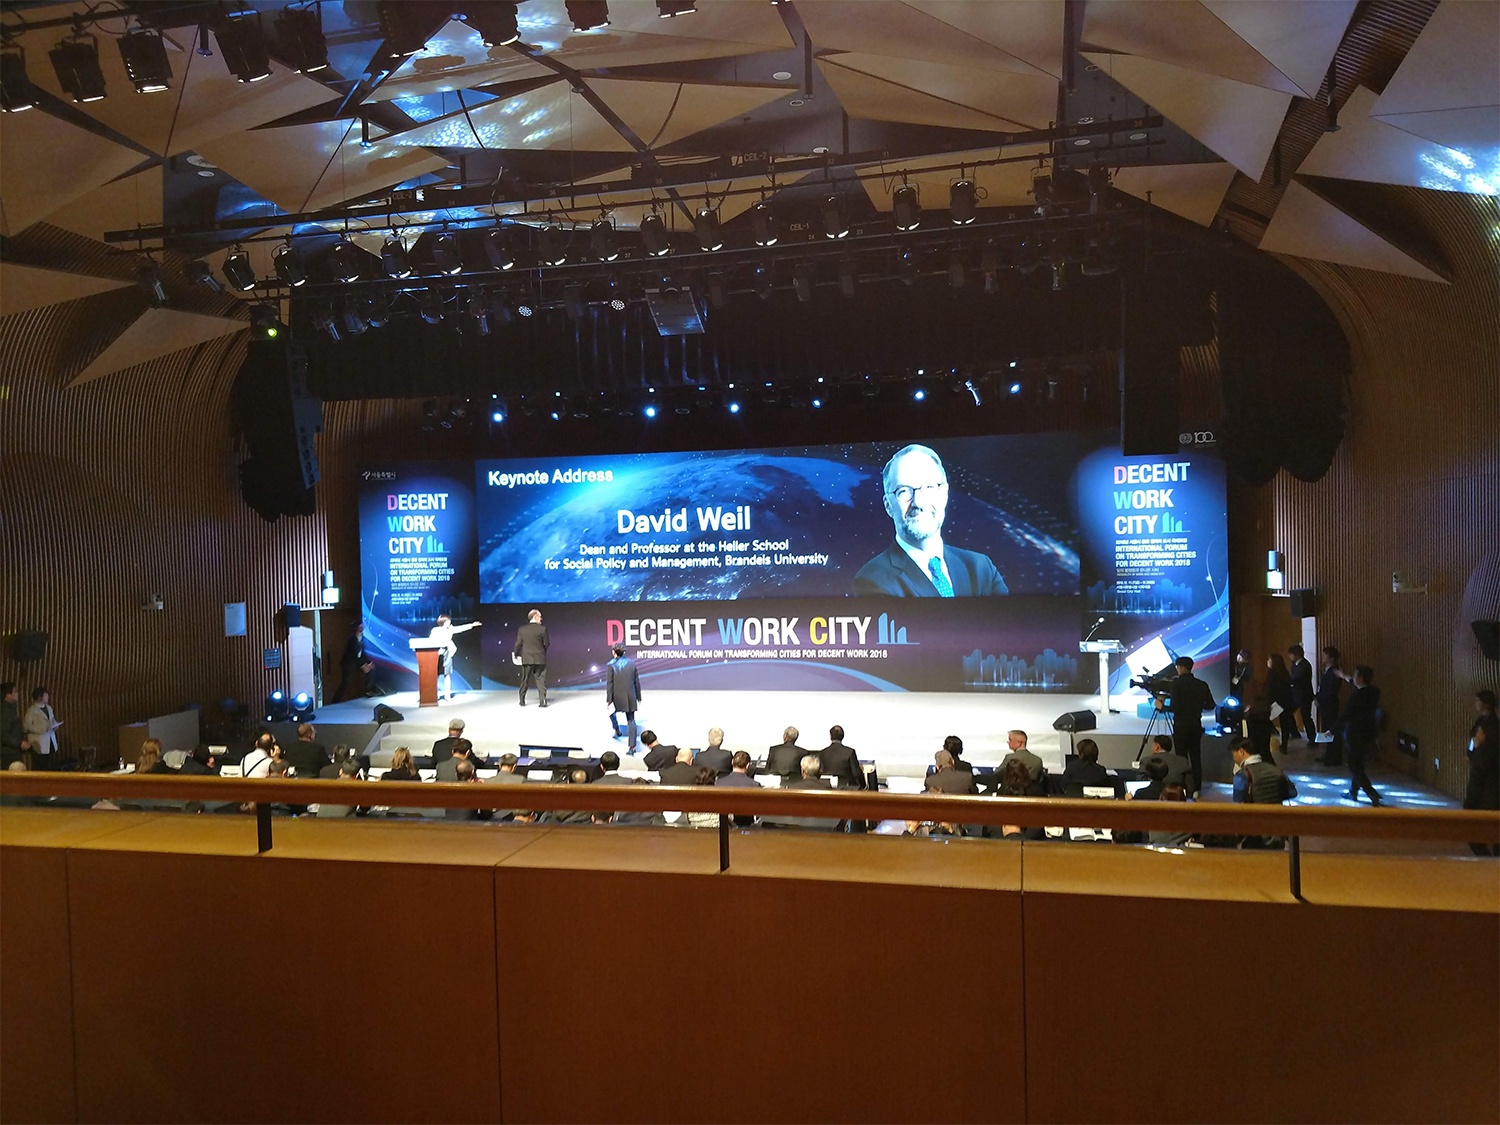 Dean Weil on stage at keynote event in Seoul